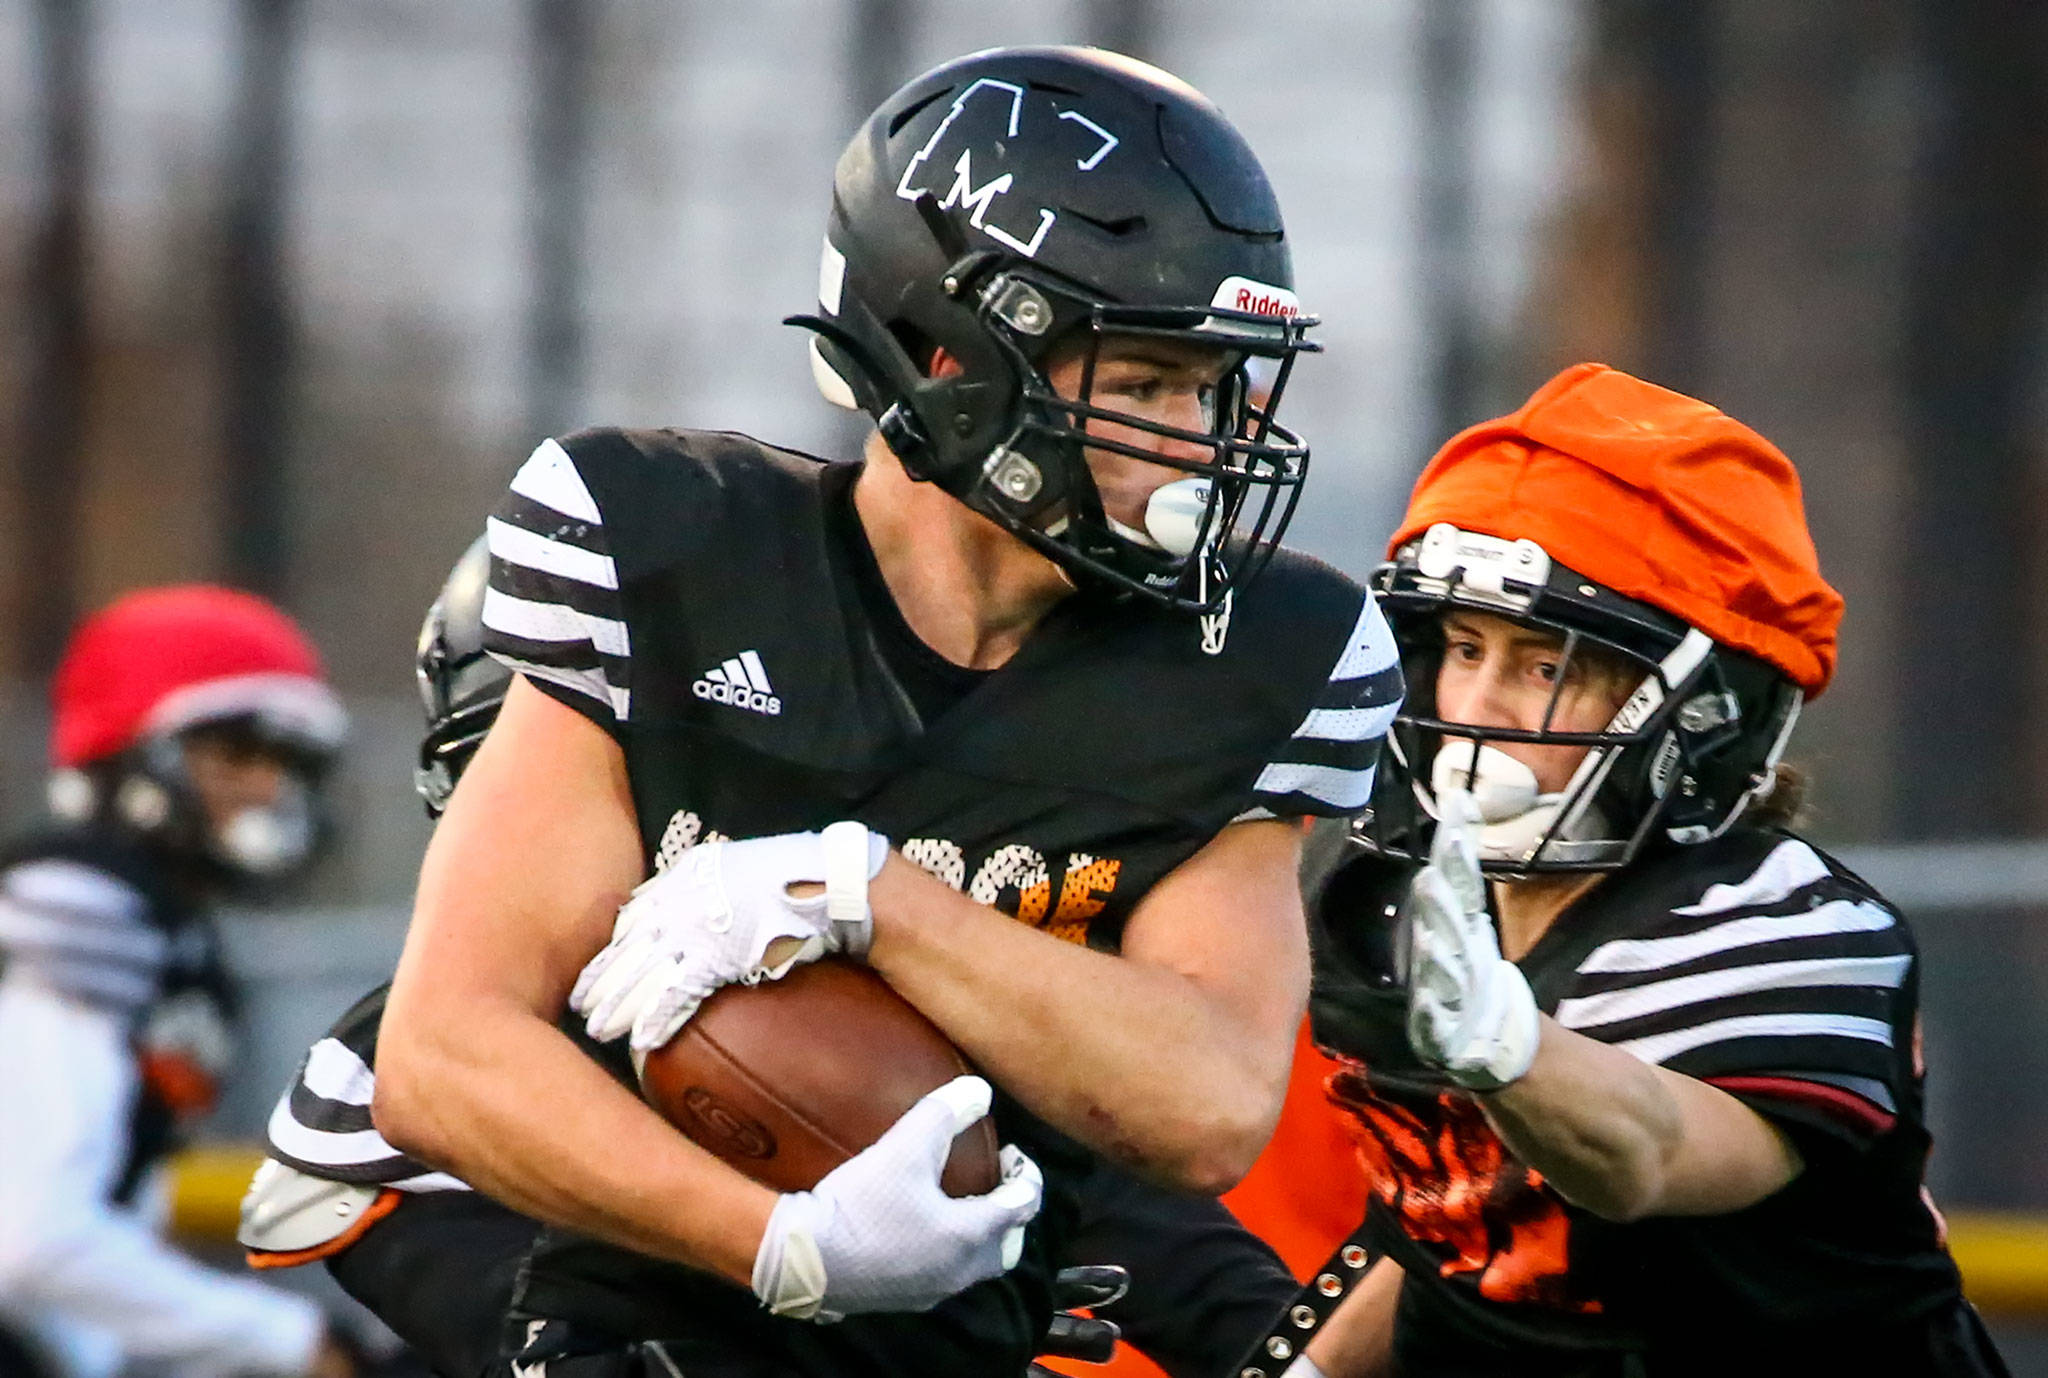 Blake Rybar of Monroe is a first-team All-Wesco selection as both a running back and a linebacker. (Kevin Clark / The Herald)